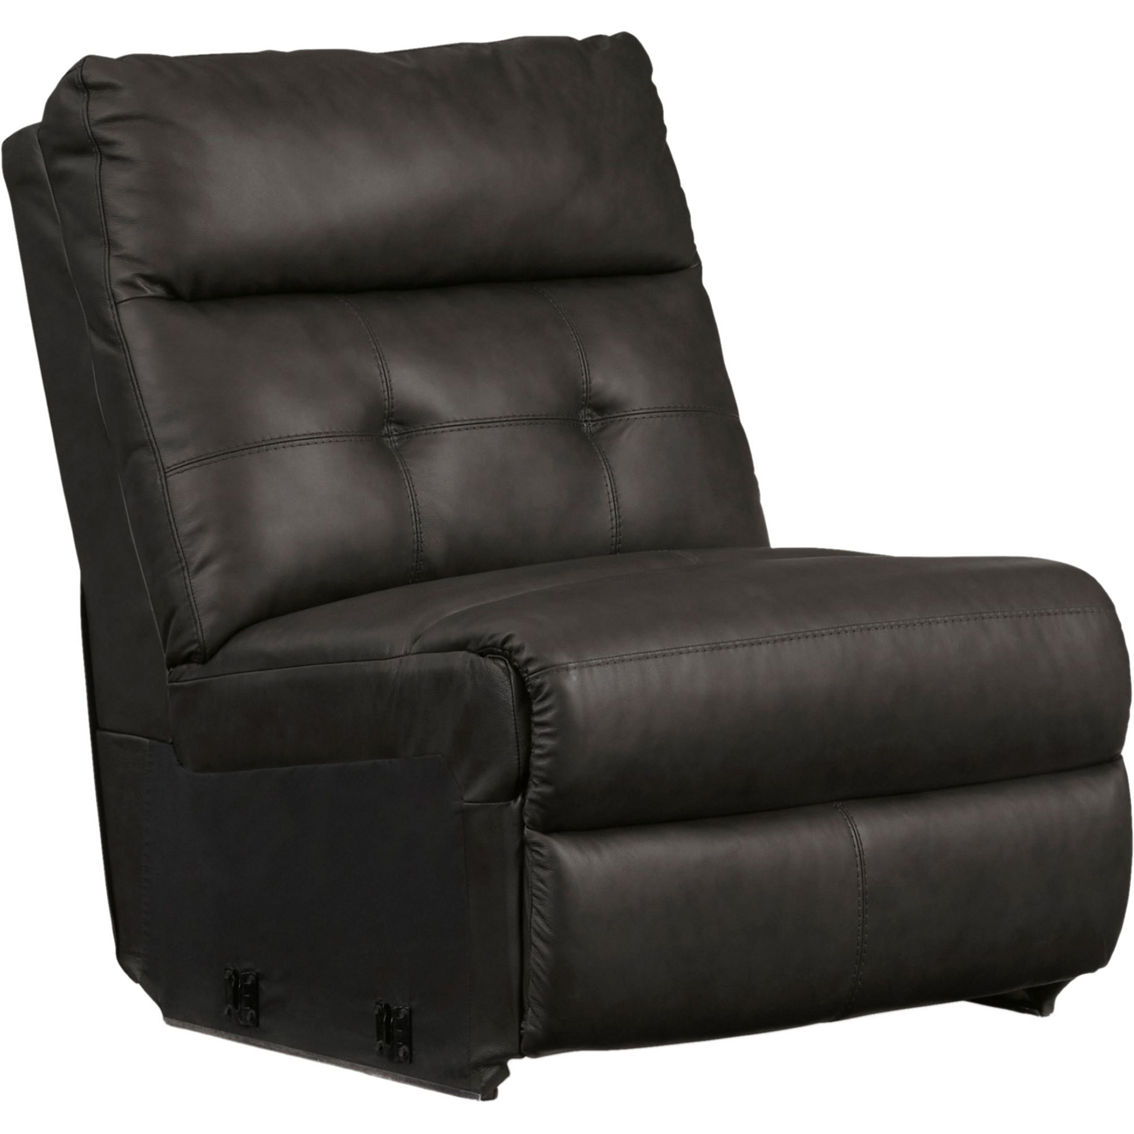 Leather+ by Ashley Mackie Pike 5 pc. Power Reclining Sectional - Image 8 of 10